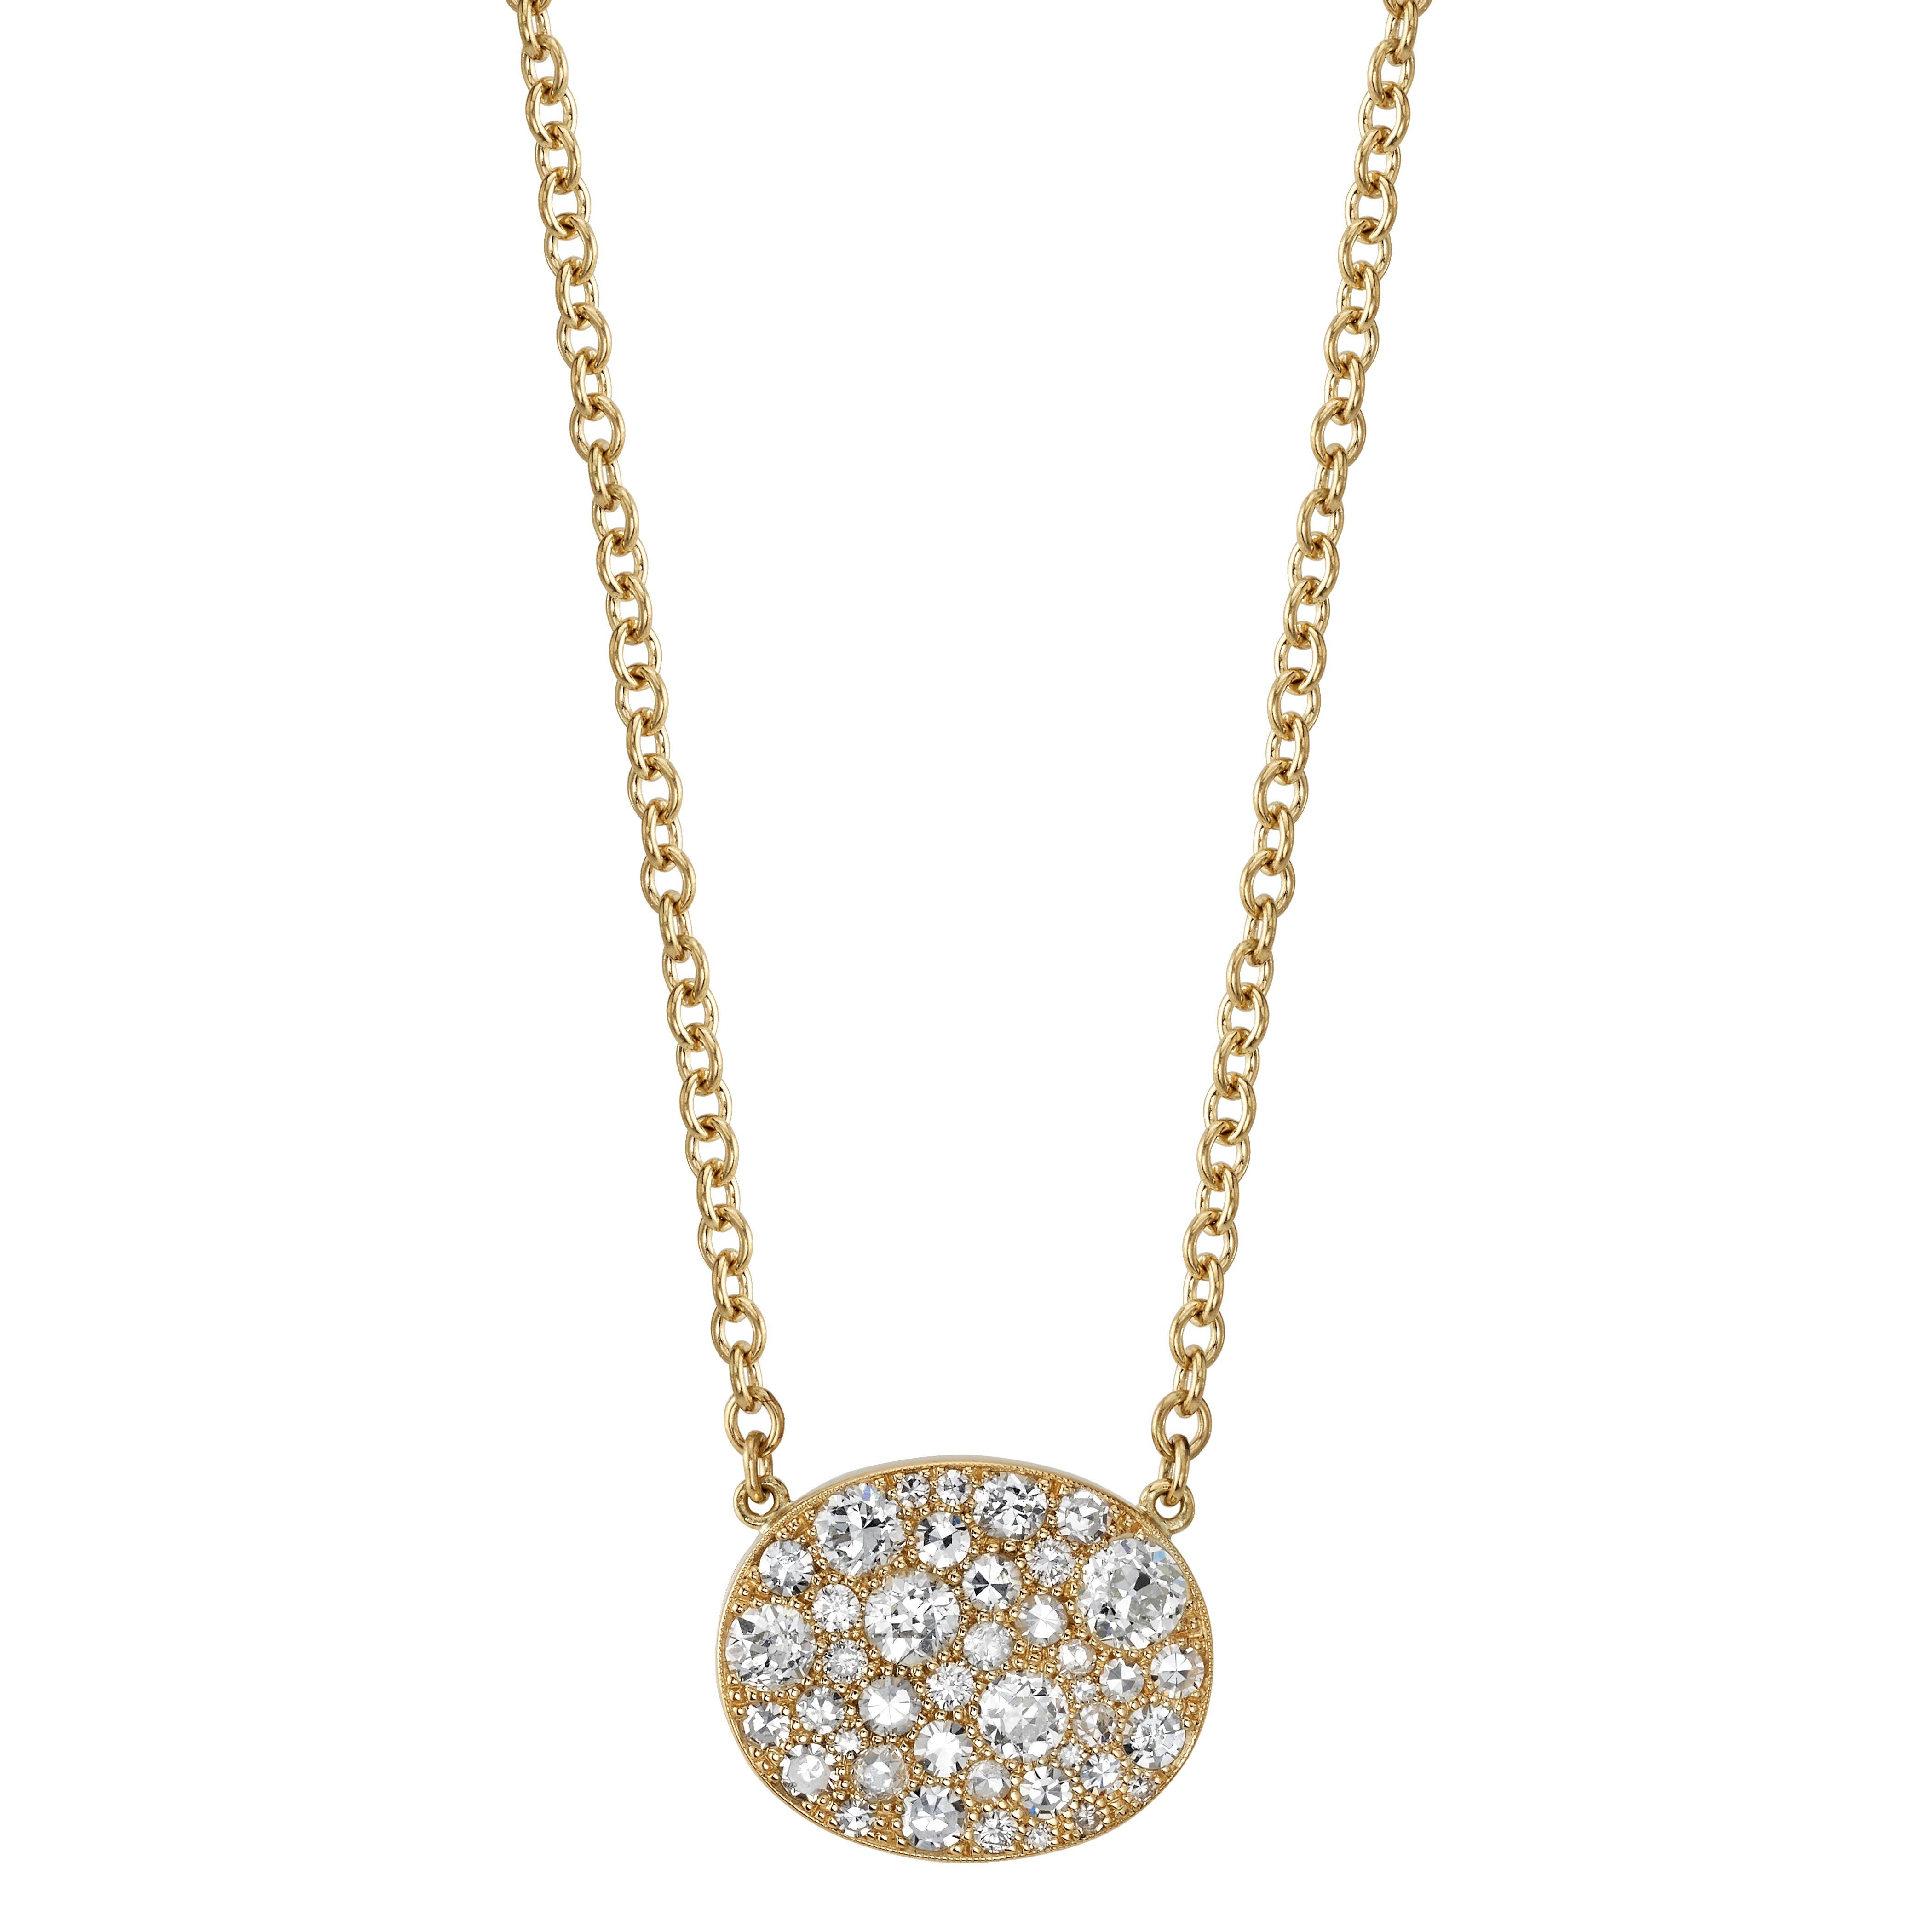 Approximately 1.80ctw varying old cut and round brilliant cut diamonds in a handcrafted 18K oxidized yellow gold pendant. Price may vary according to total diamond weight. Necklace includes 18